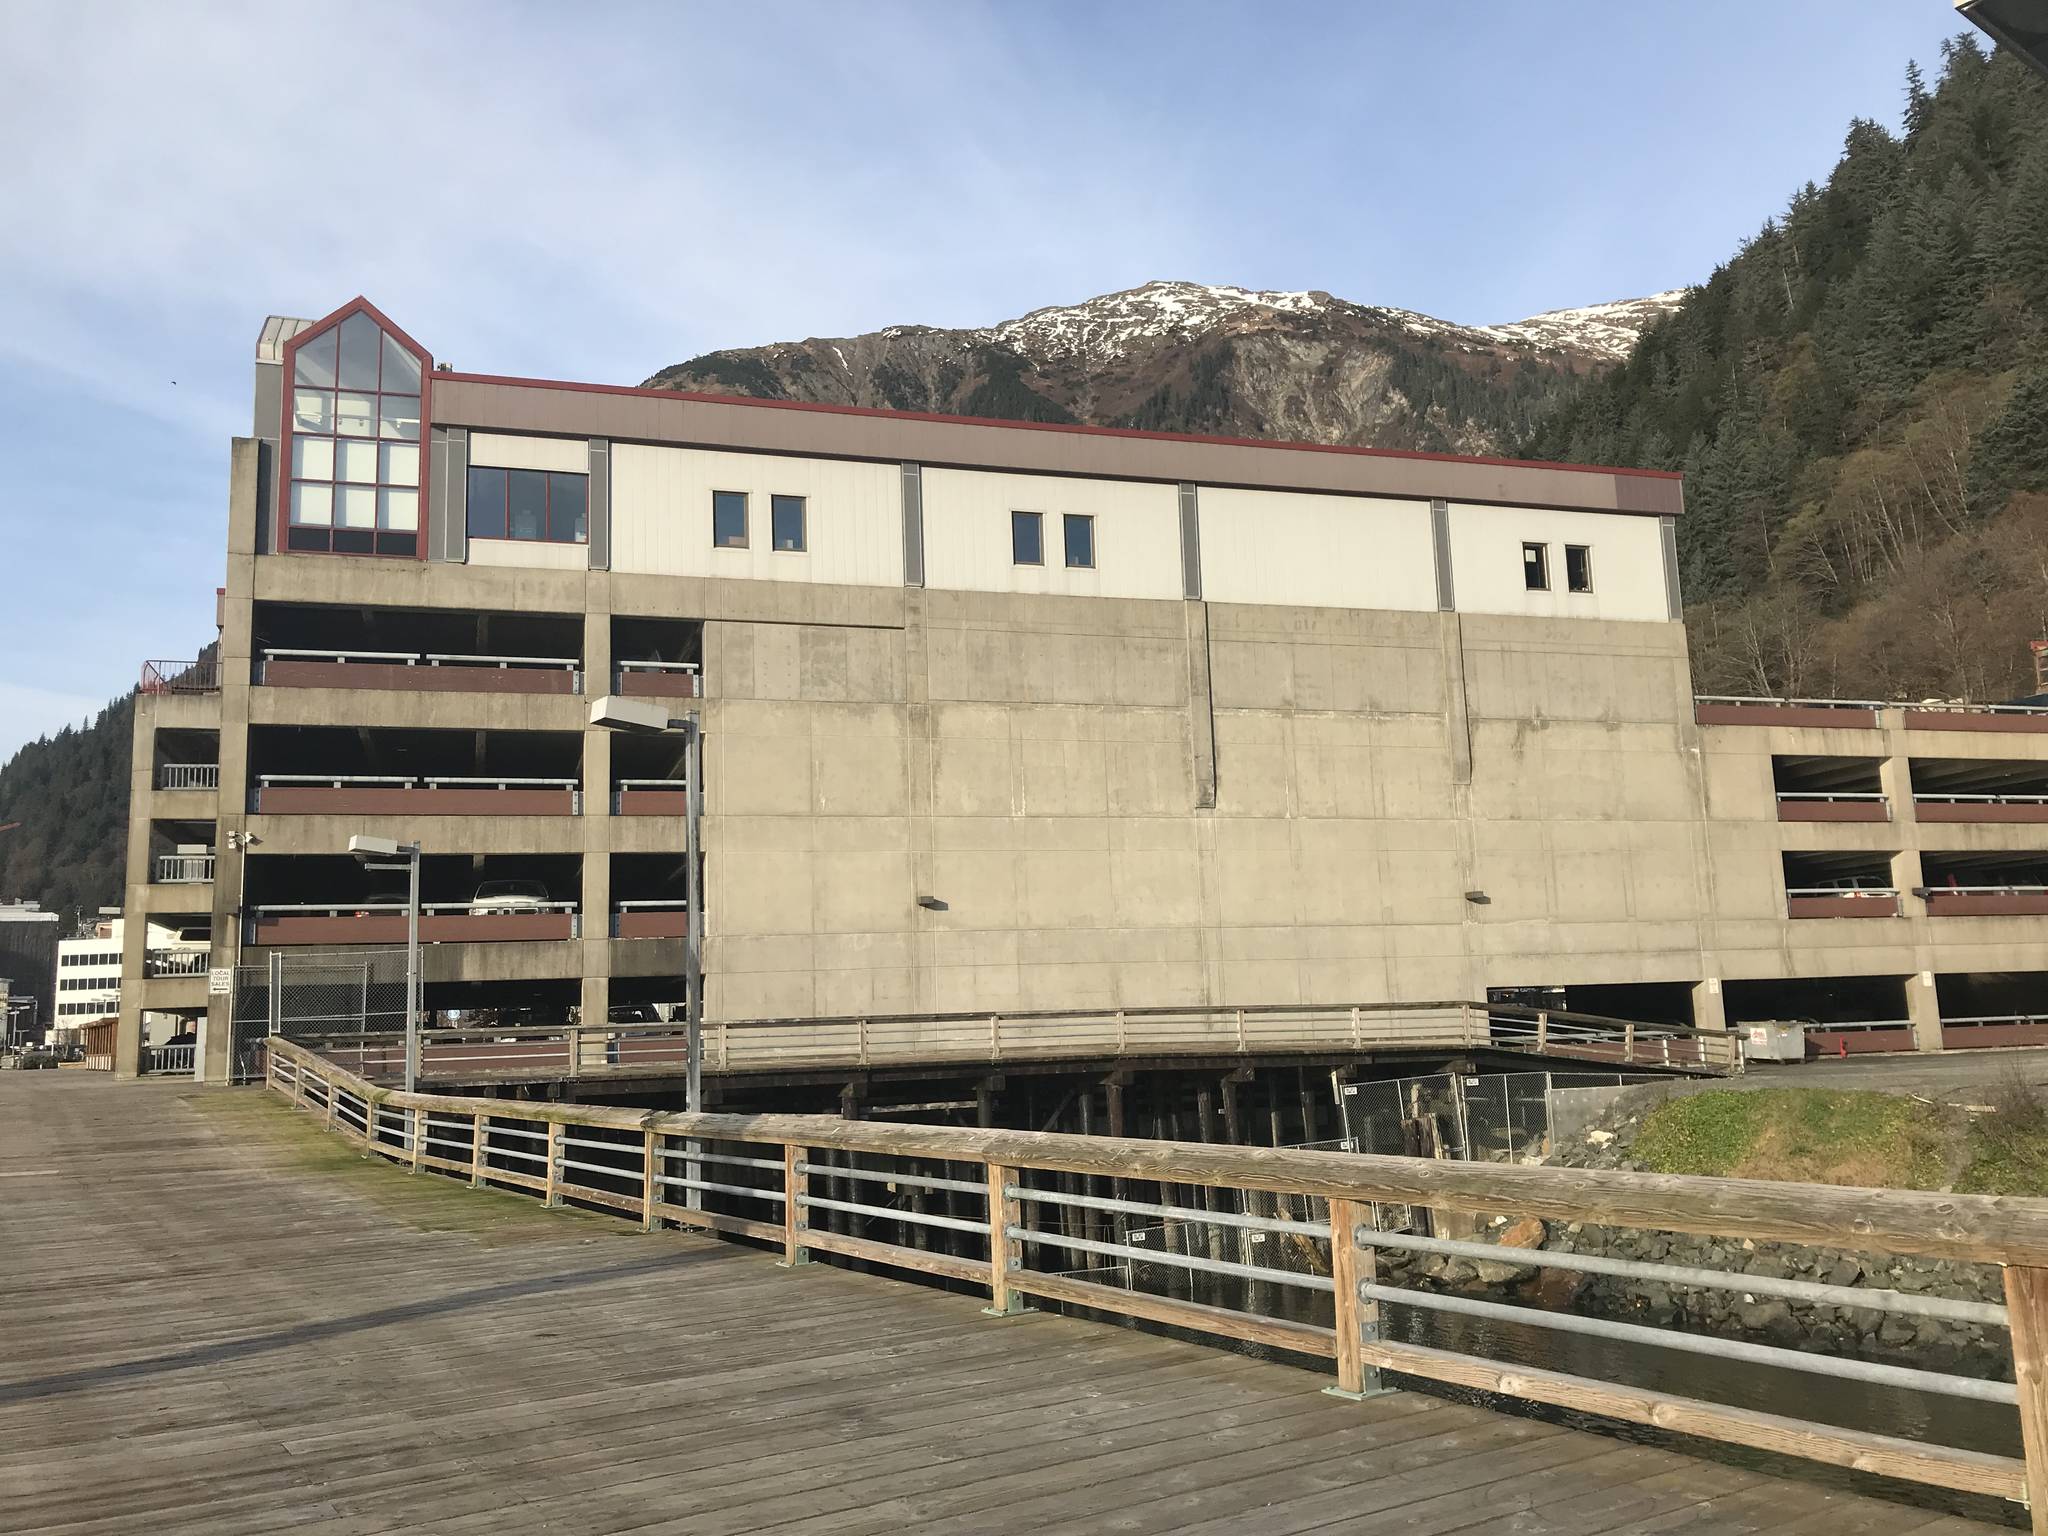 The south-facing wall of the Marine Parking Garage could serve as the location of a large mural that would greet visitors to town. (Alex McCarthy | Juneau Empire)